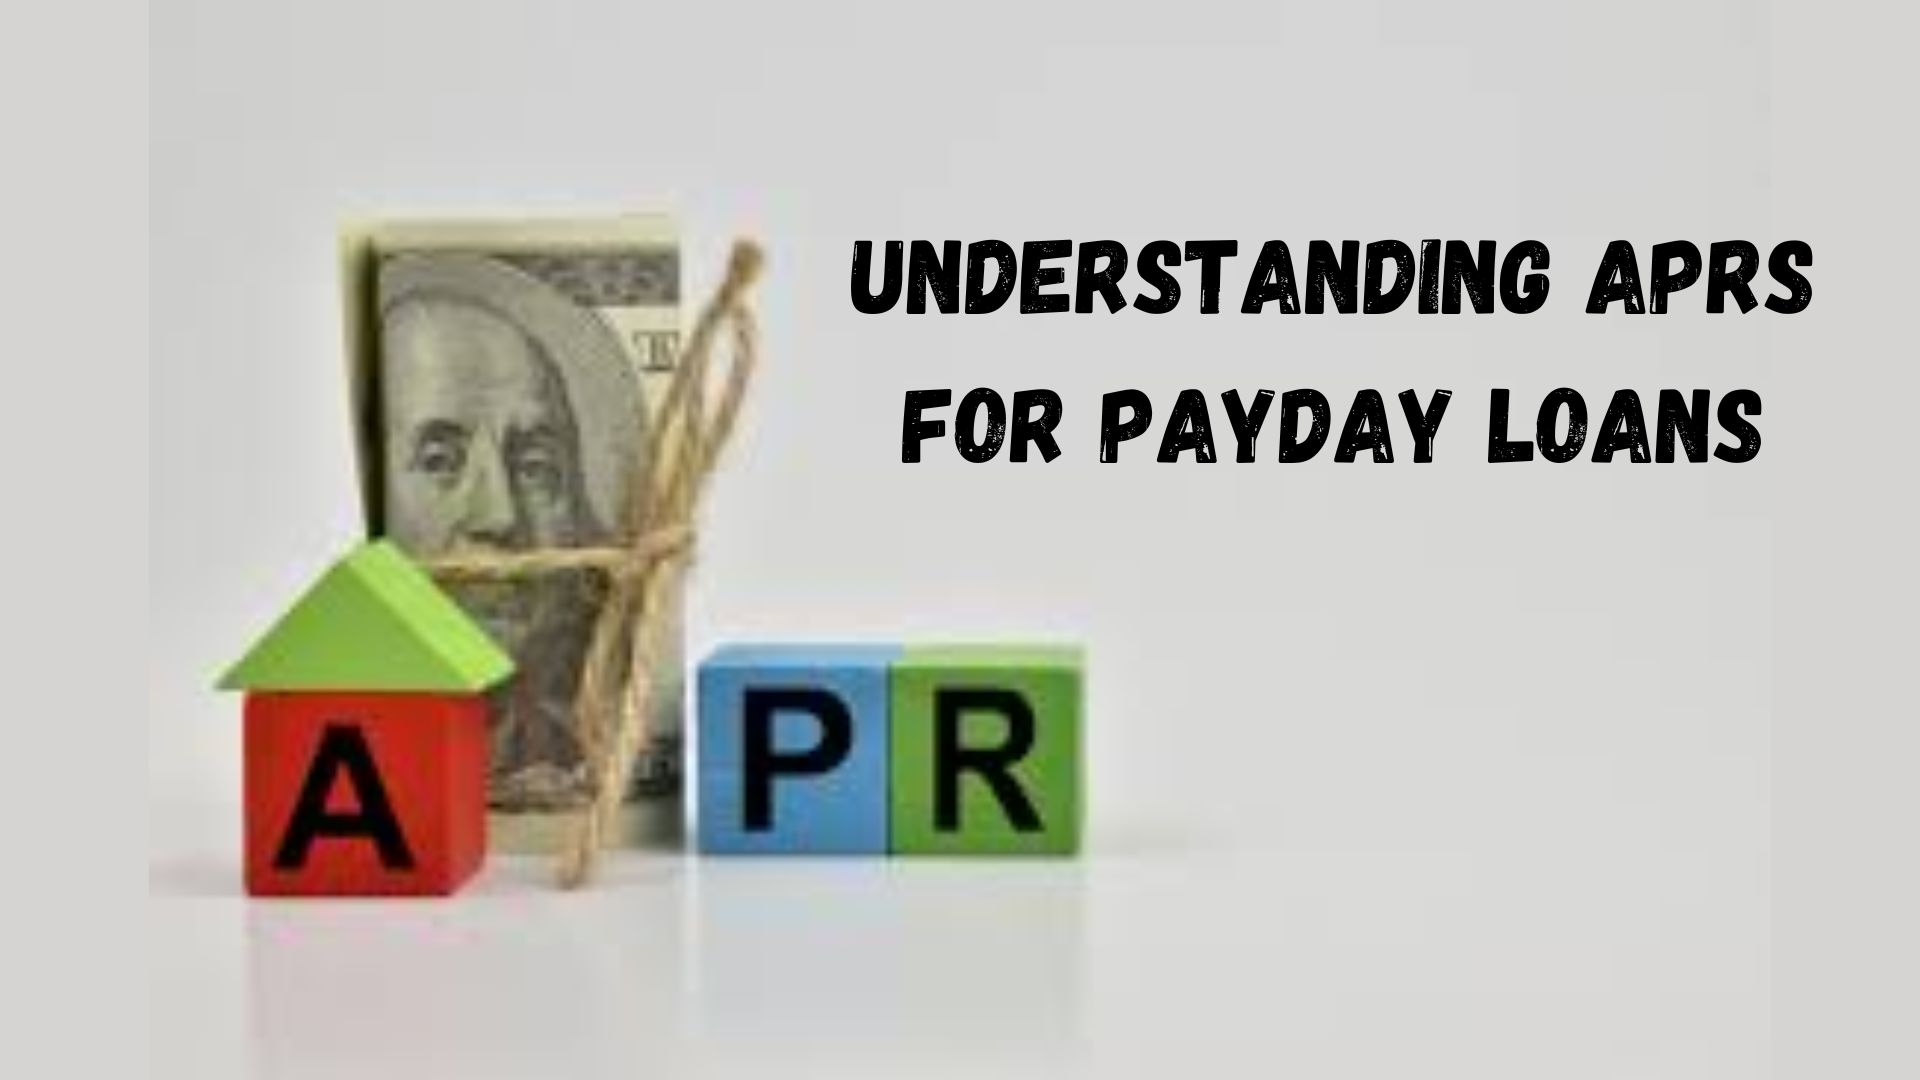 Understanding APRs for Payday Loans.